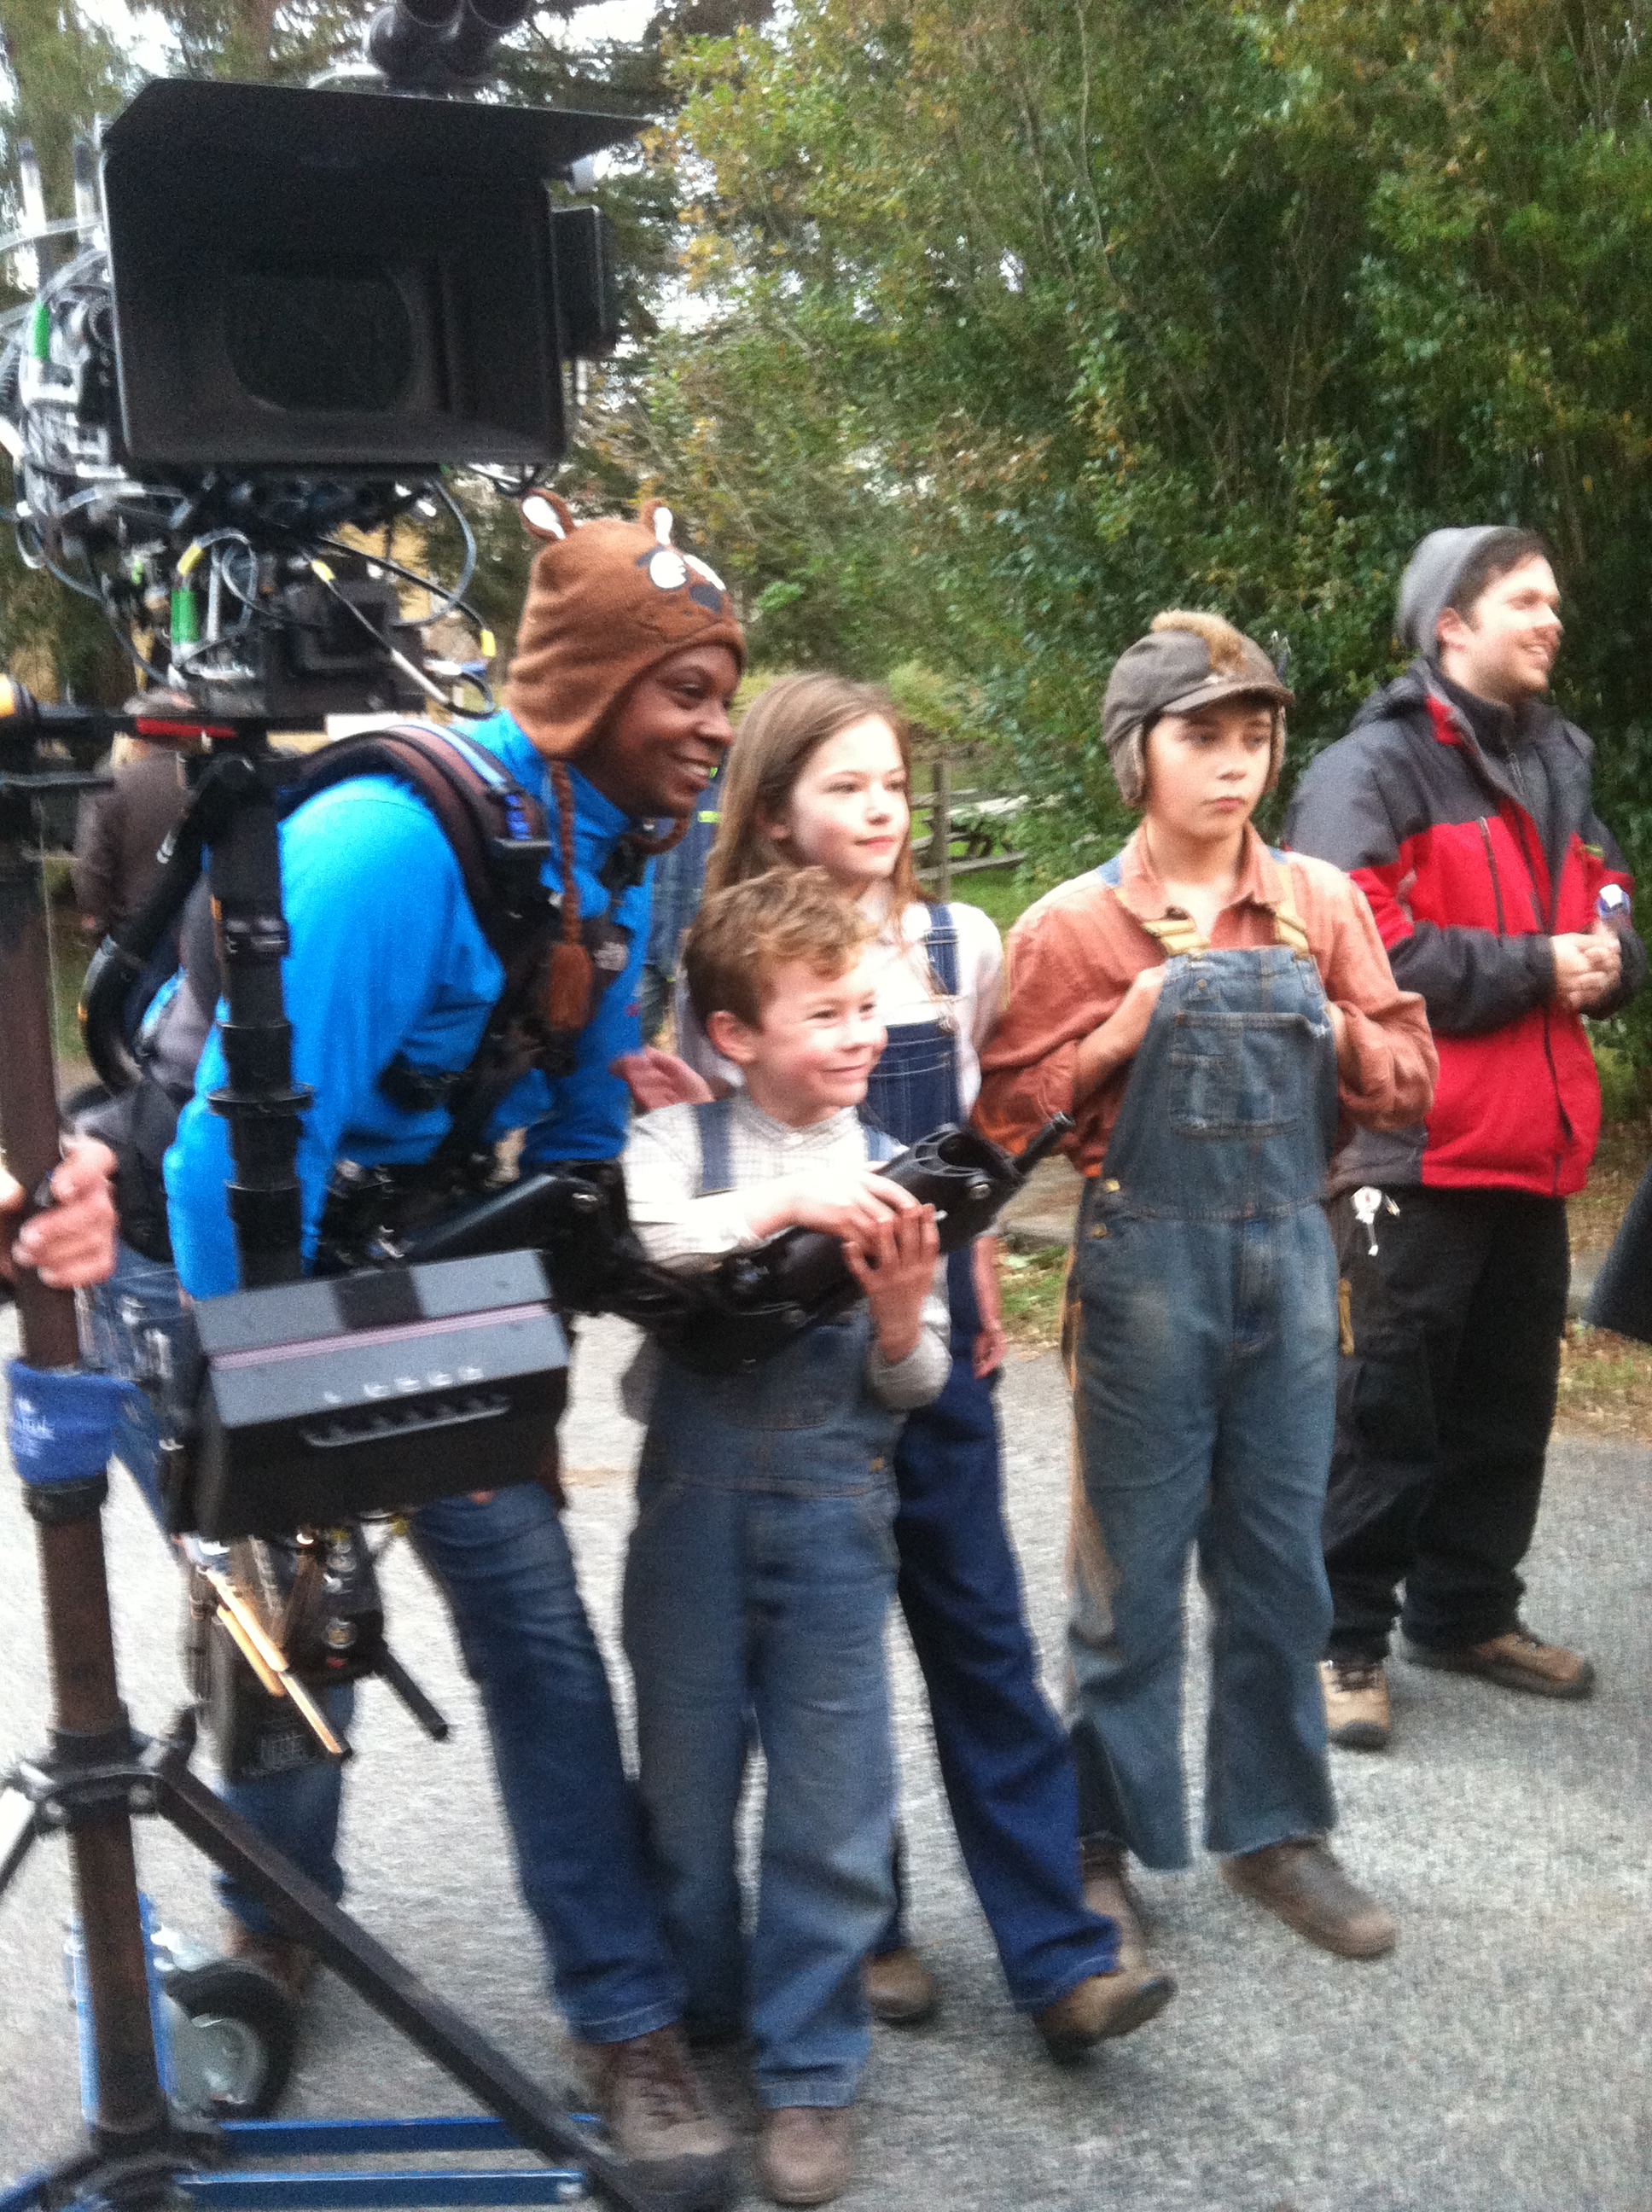 That is a wrap! Wrapping Mackenzie Foy on the set of Wish You Well with JP Vanderloo, Seamus Davey-Fitzpatrick, Author David Baldacci & Prop Master Rick Craft & Alfeo Dixon